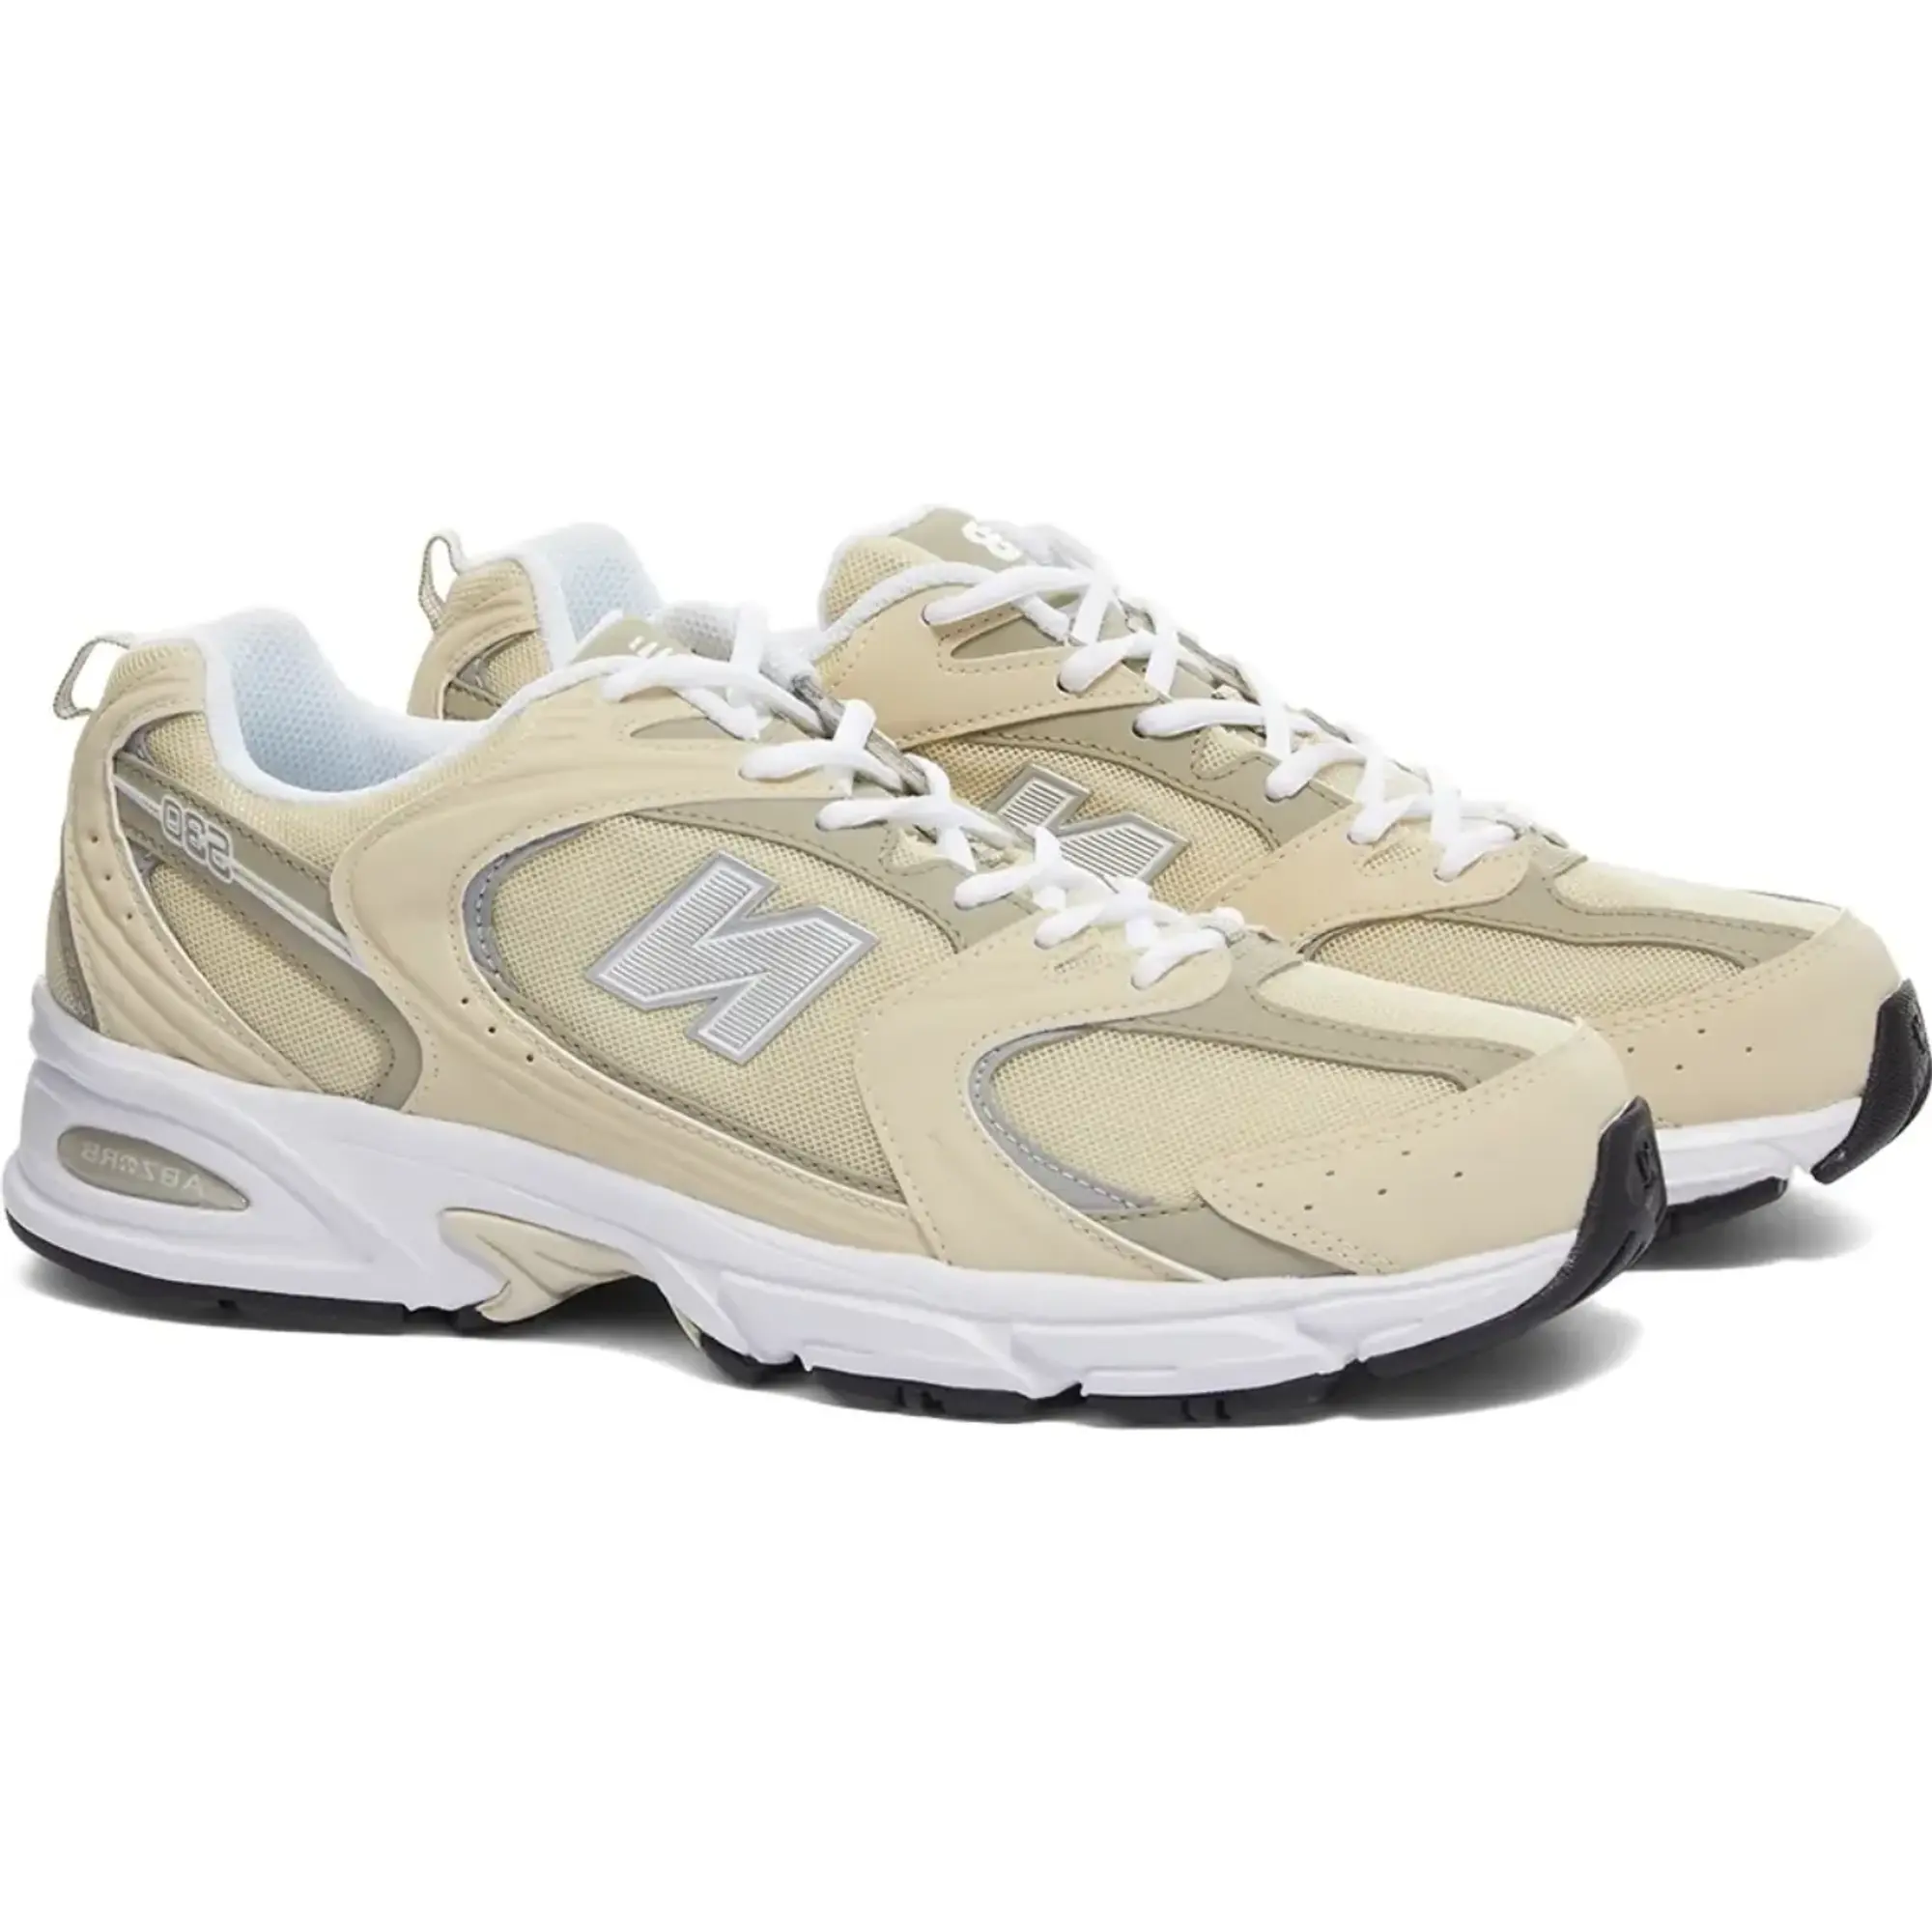 New Balance Mr530 Trainers Sea Salt Silver White,White,Blue,Grey,Multi,Pink,Natural